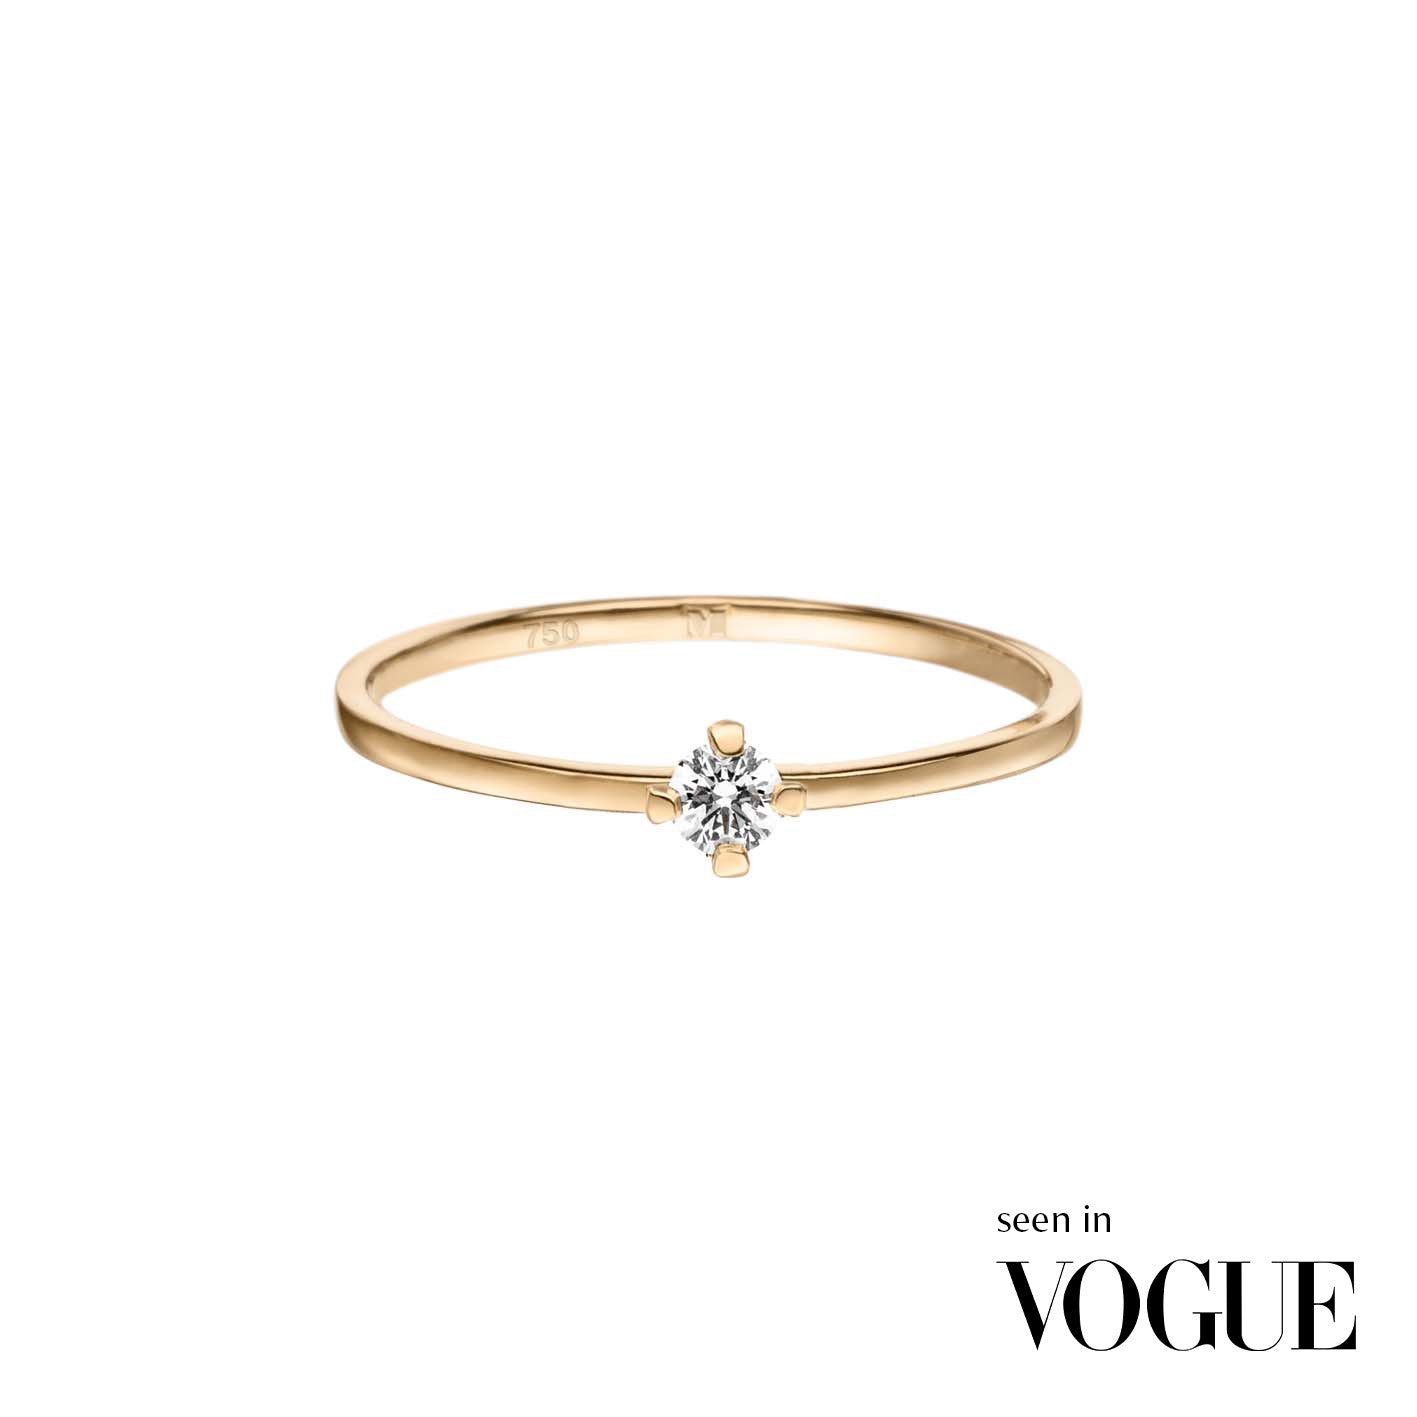 Golden ReMind mini solitaire ring